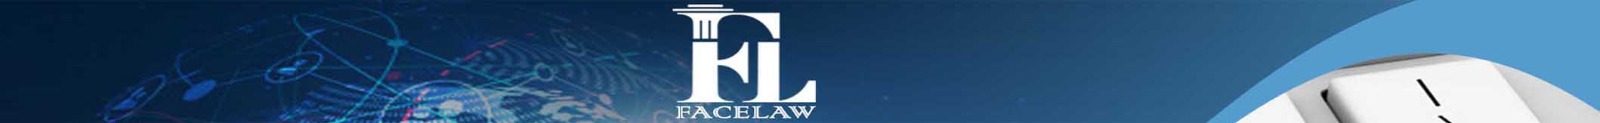 list of litigation lawyers in toronto